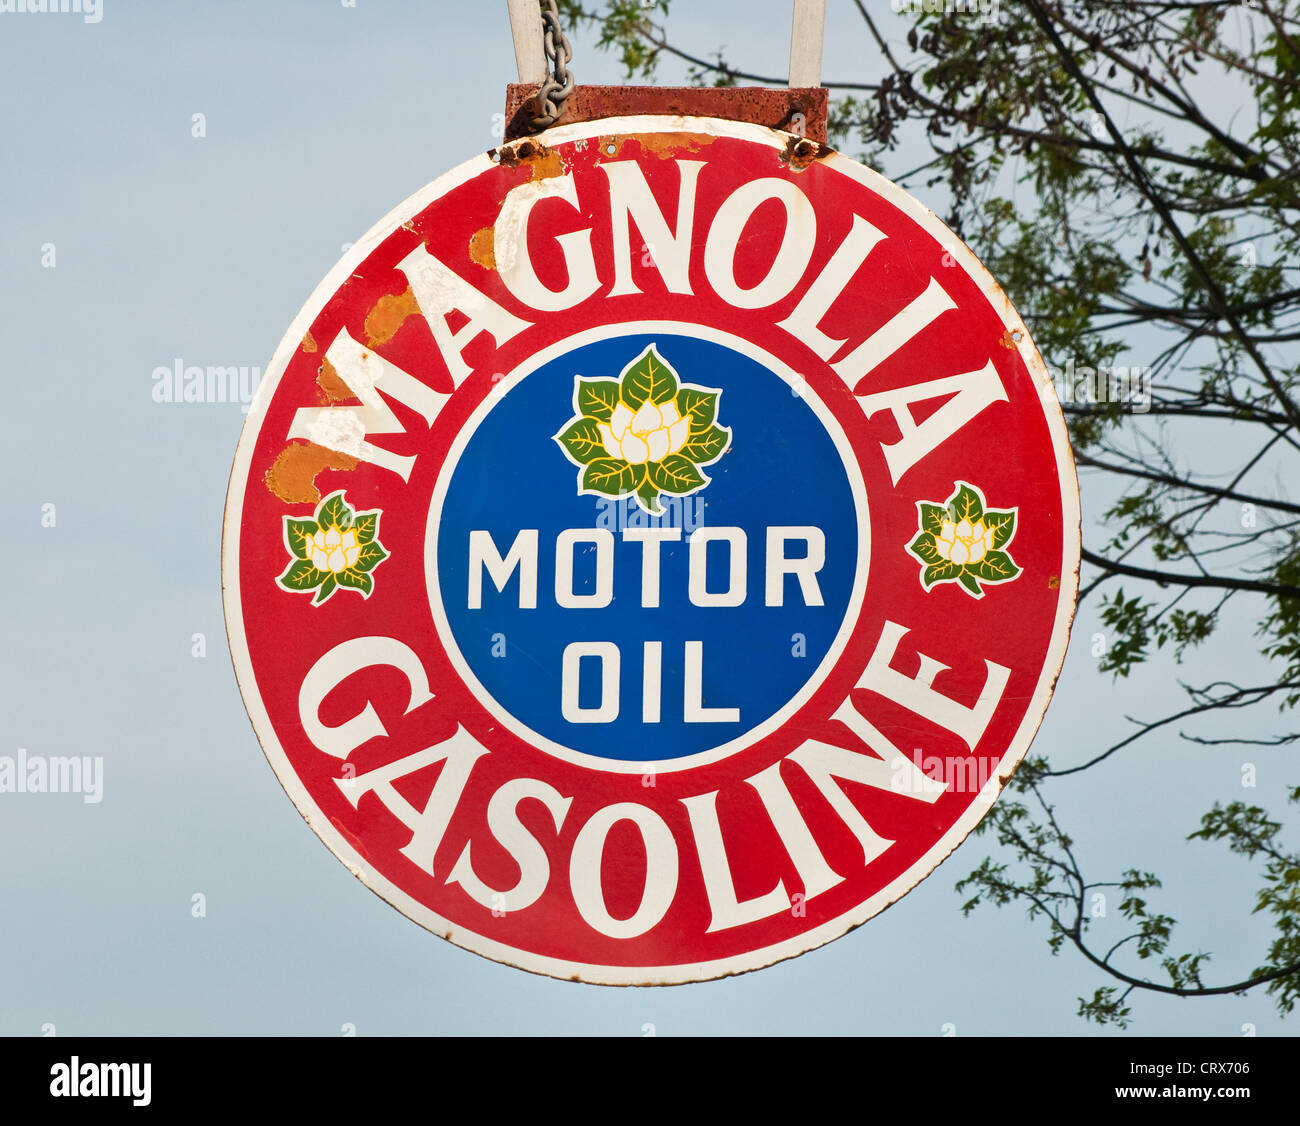 Magnolia Gasoline, sign at historical gas station, Historic Walk in Castroville, Texas, USA Stock Photo